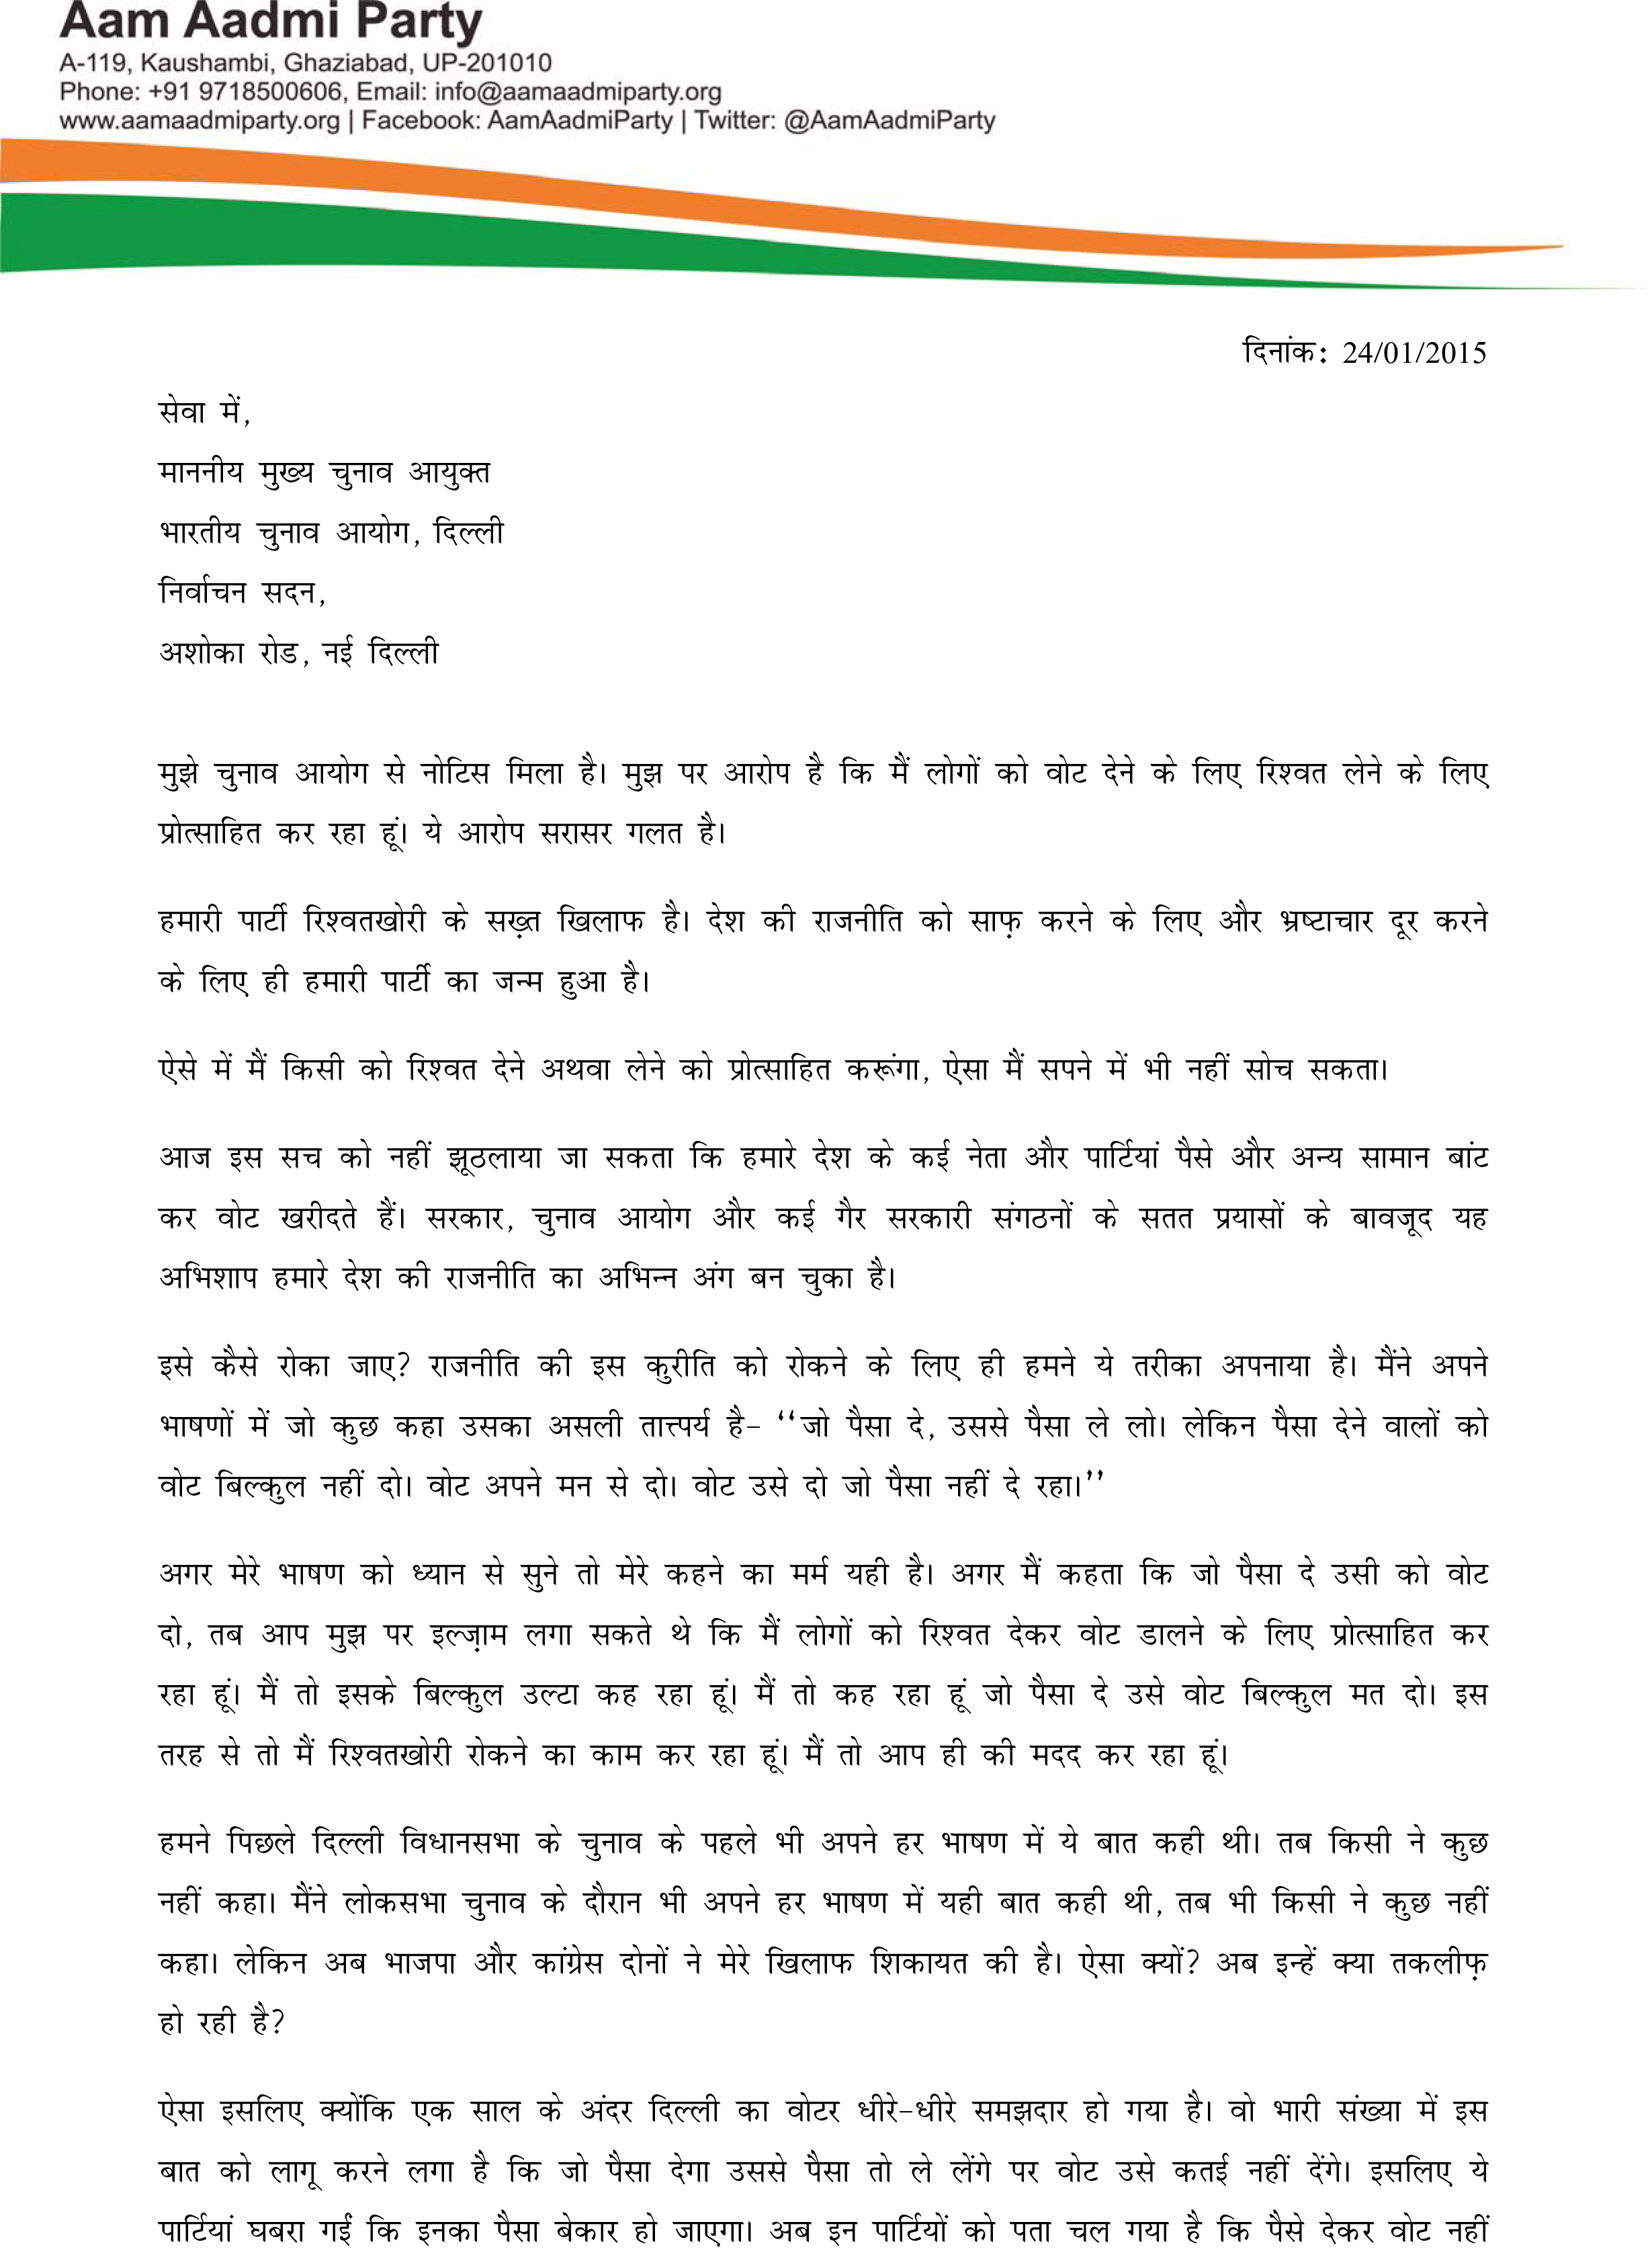 Arvind Kejriwal S Reply To Ec S Show Cause Notice Aam Aadmi Party S Awareness Materials